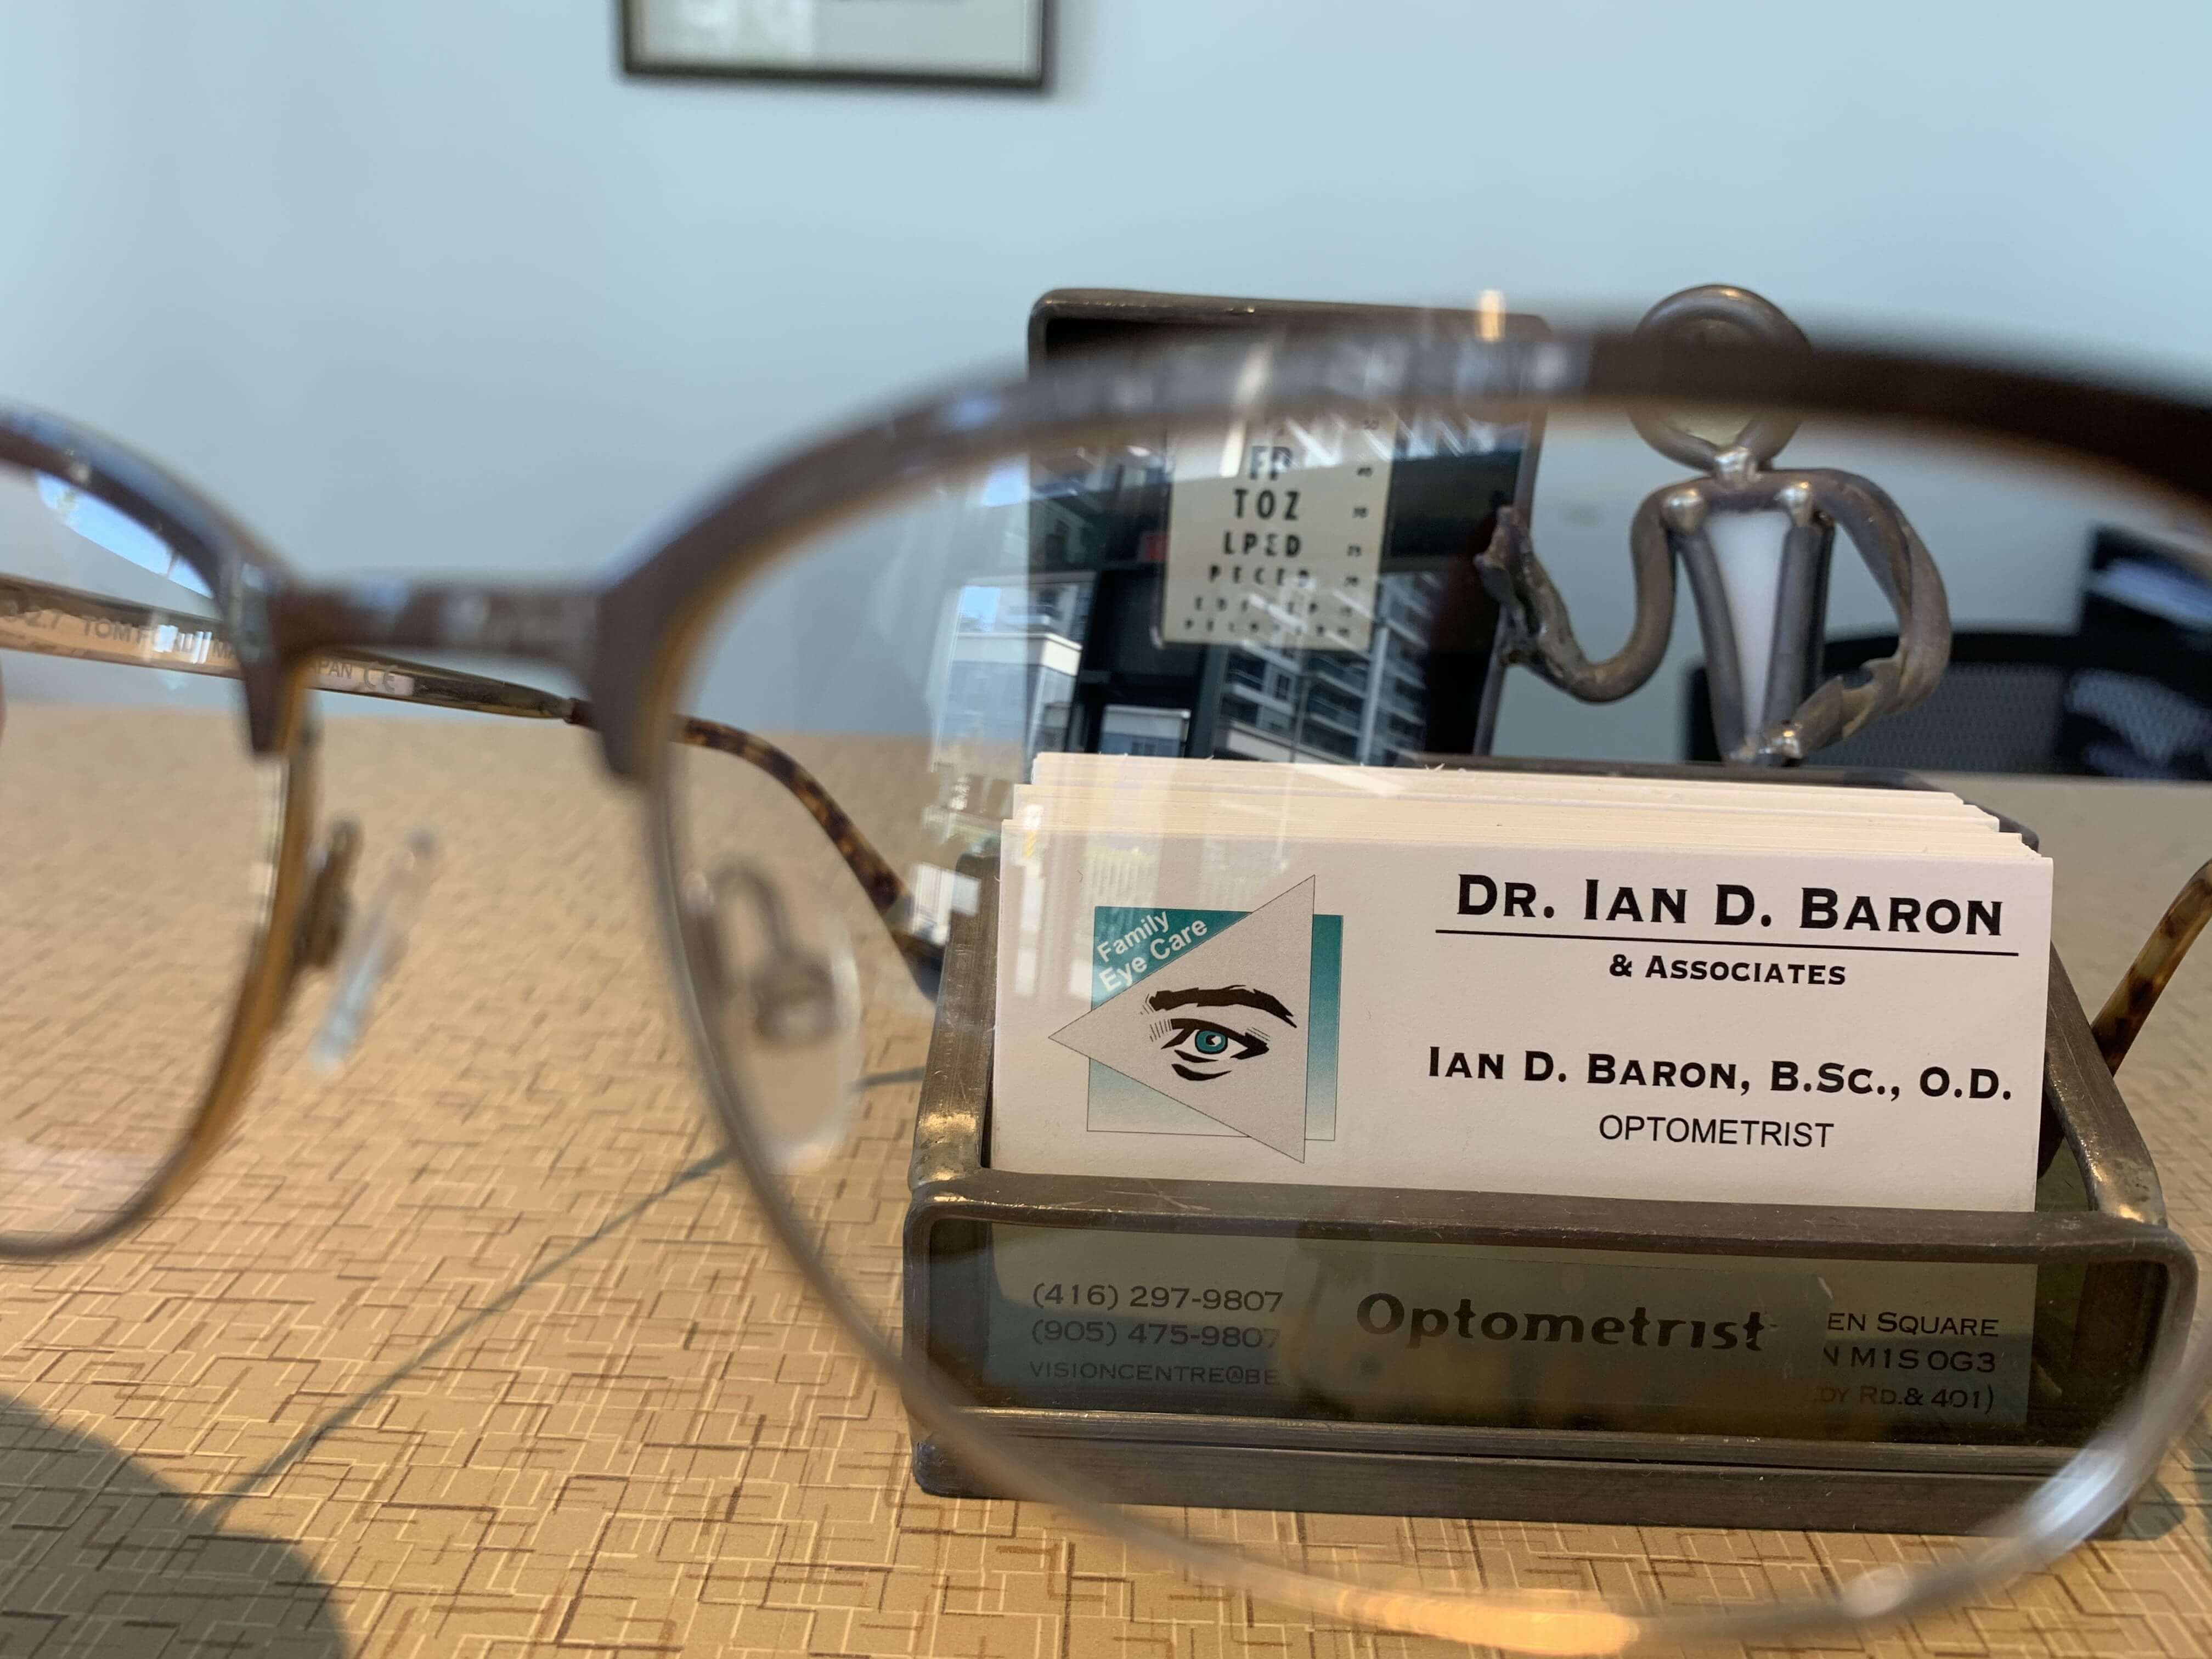 Dr. Ian D. Baron Business card, with eyeglasses in back